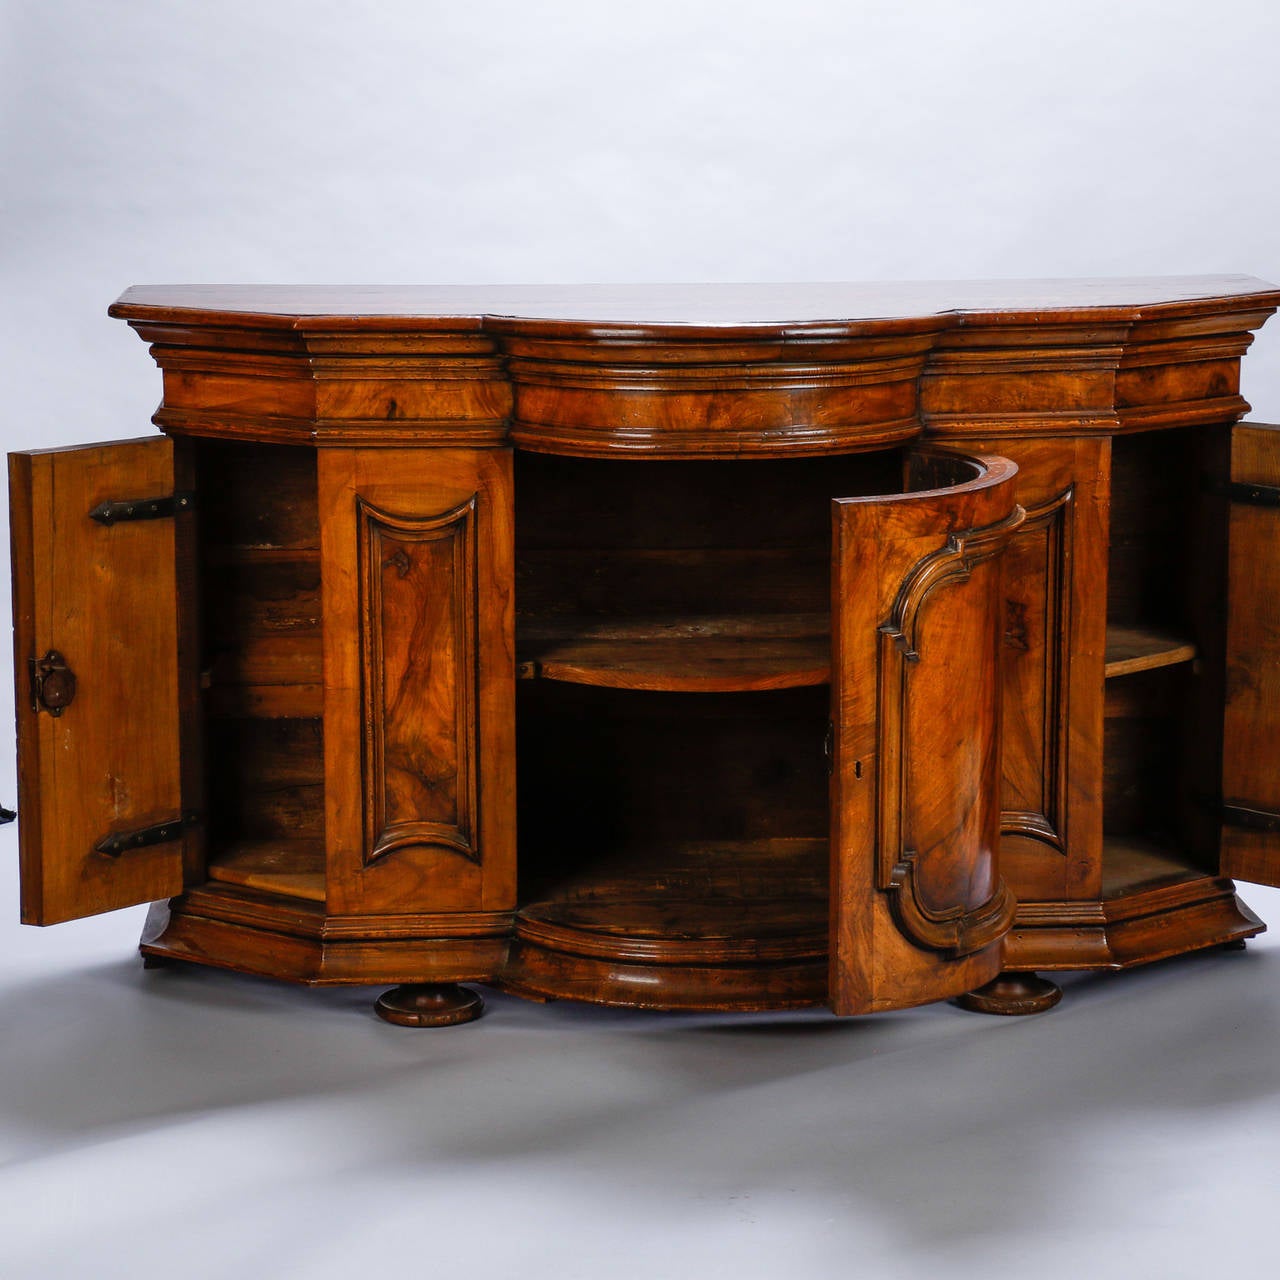 Burl walnut cabinet with rounded front and locking storage compartments, circa 1860s. Nicely figured walnut with curvy, three section rounded base. Hinged storage cabinets have functional locks and original keys. Original escutcheons not present.